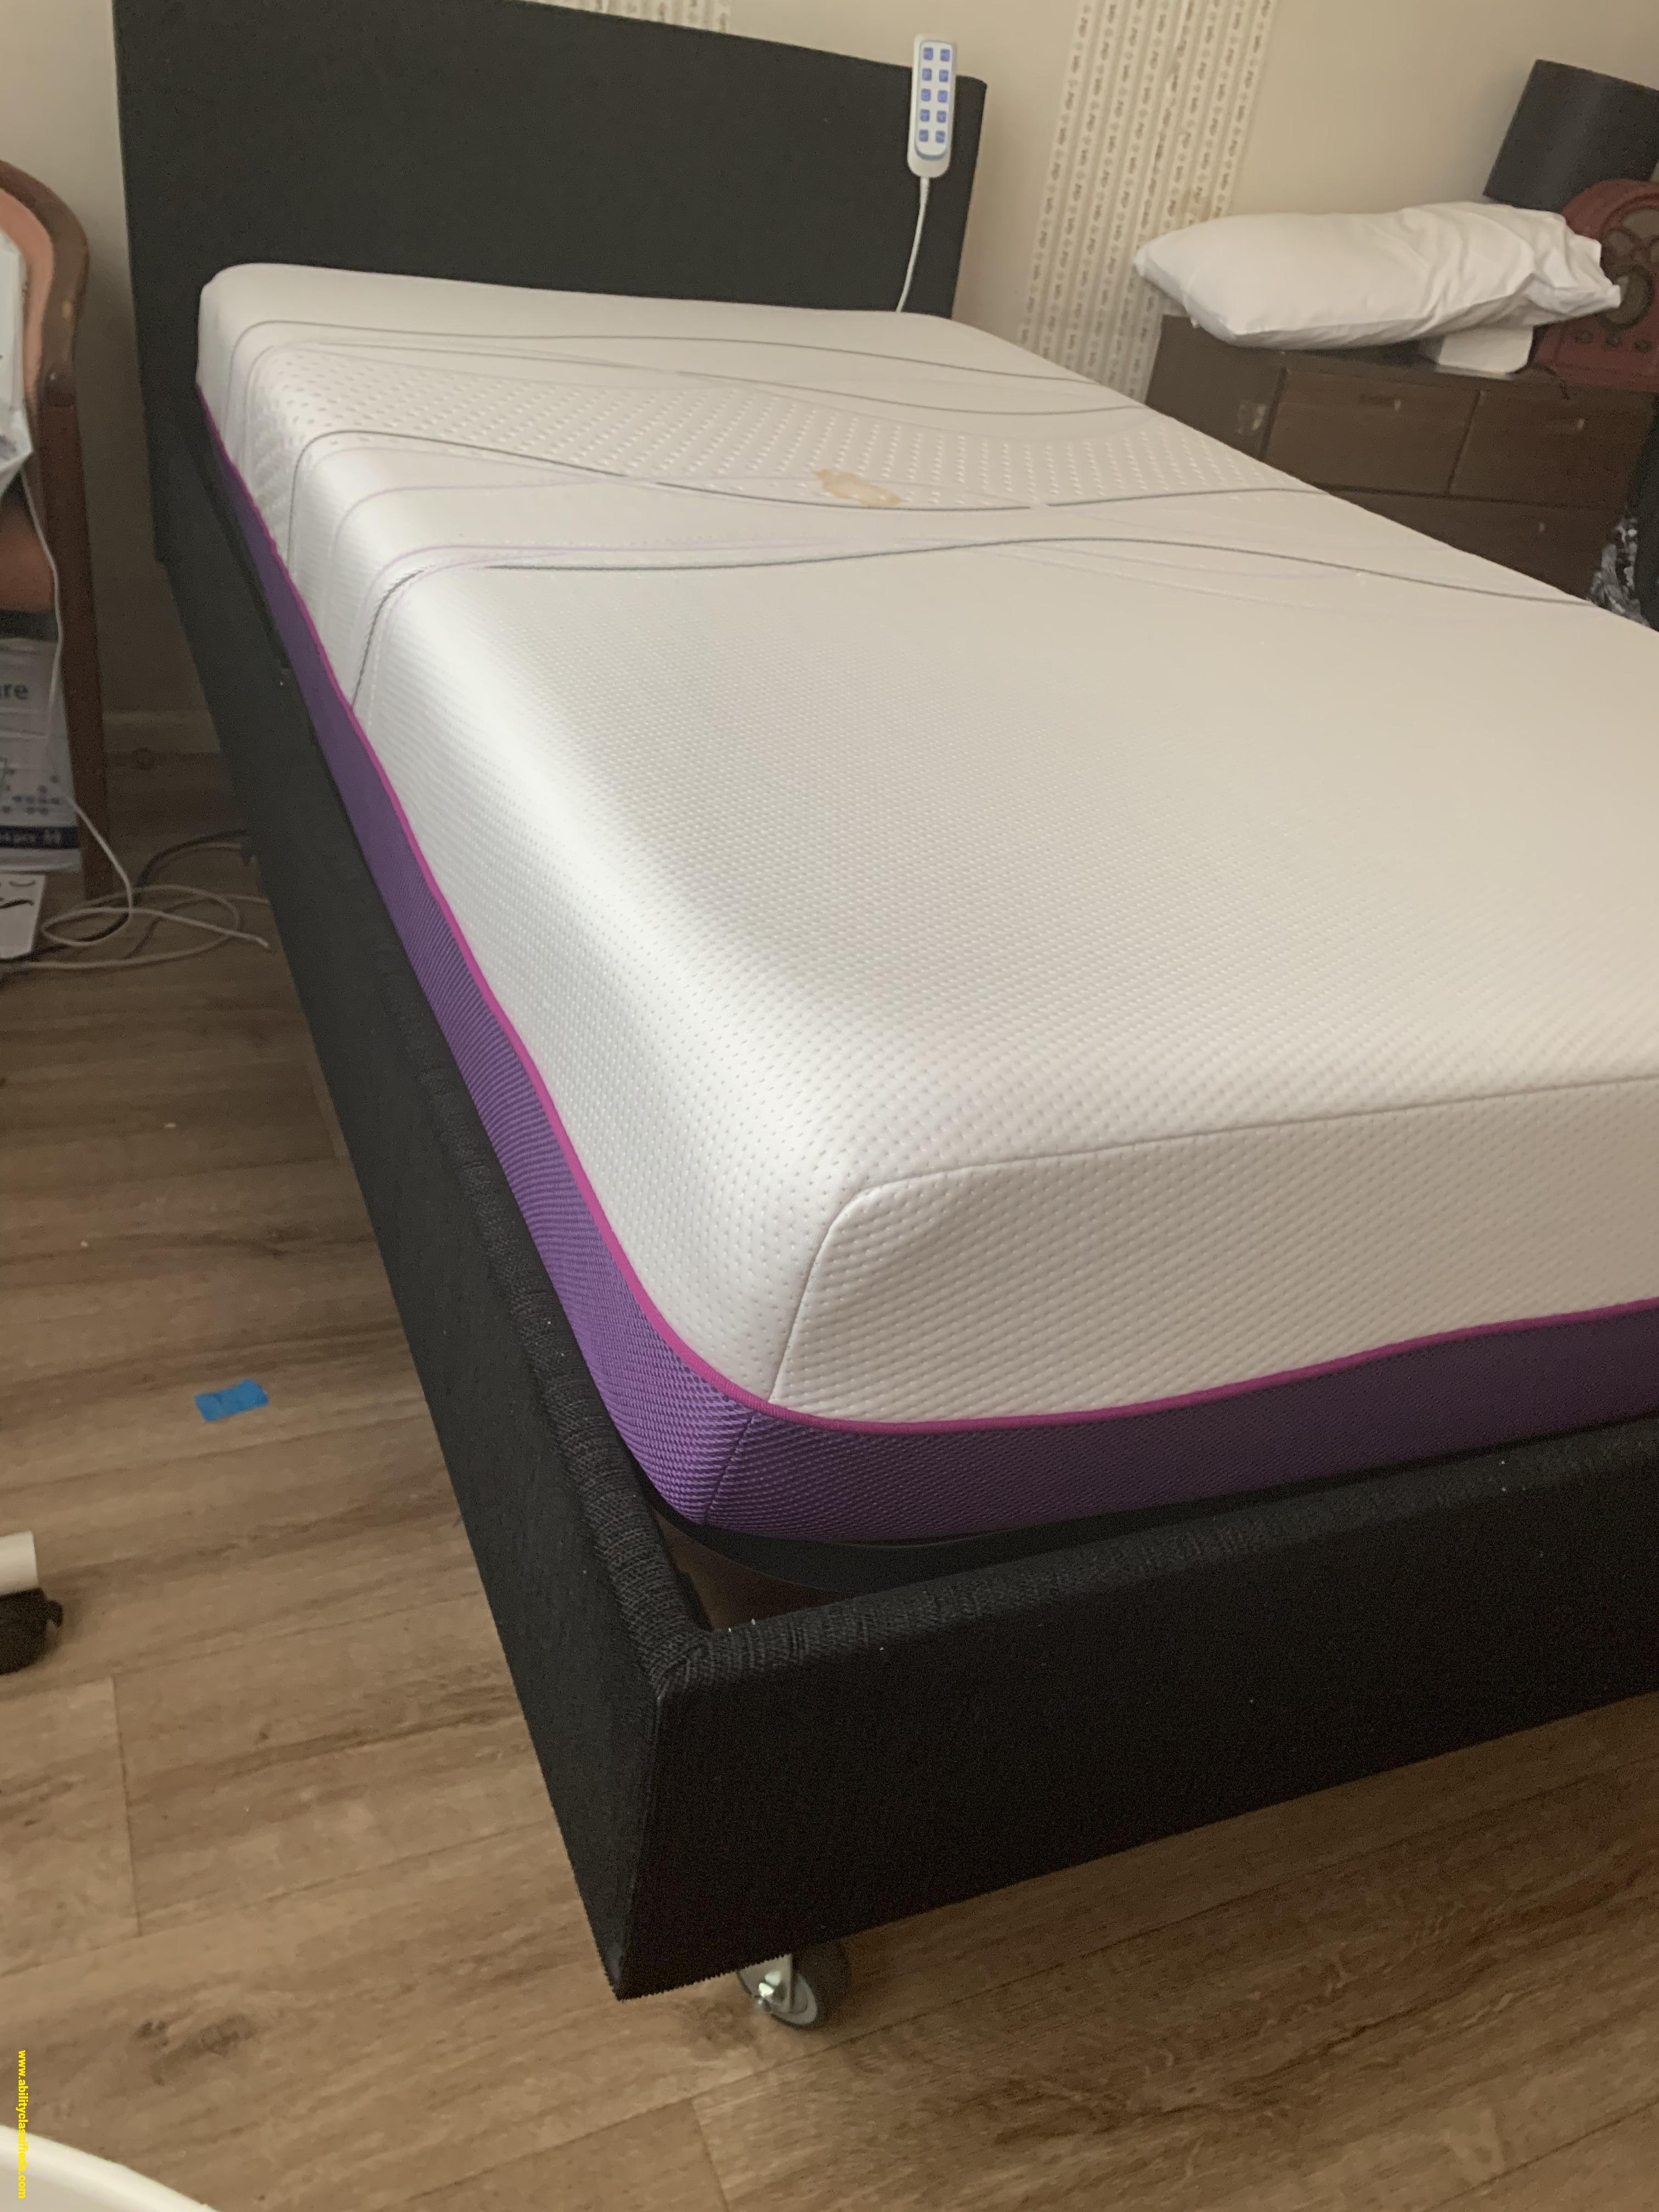 Hospital style bed with all the safety and comfort mechanics 